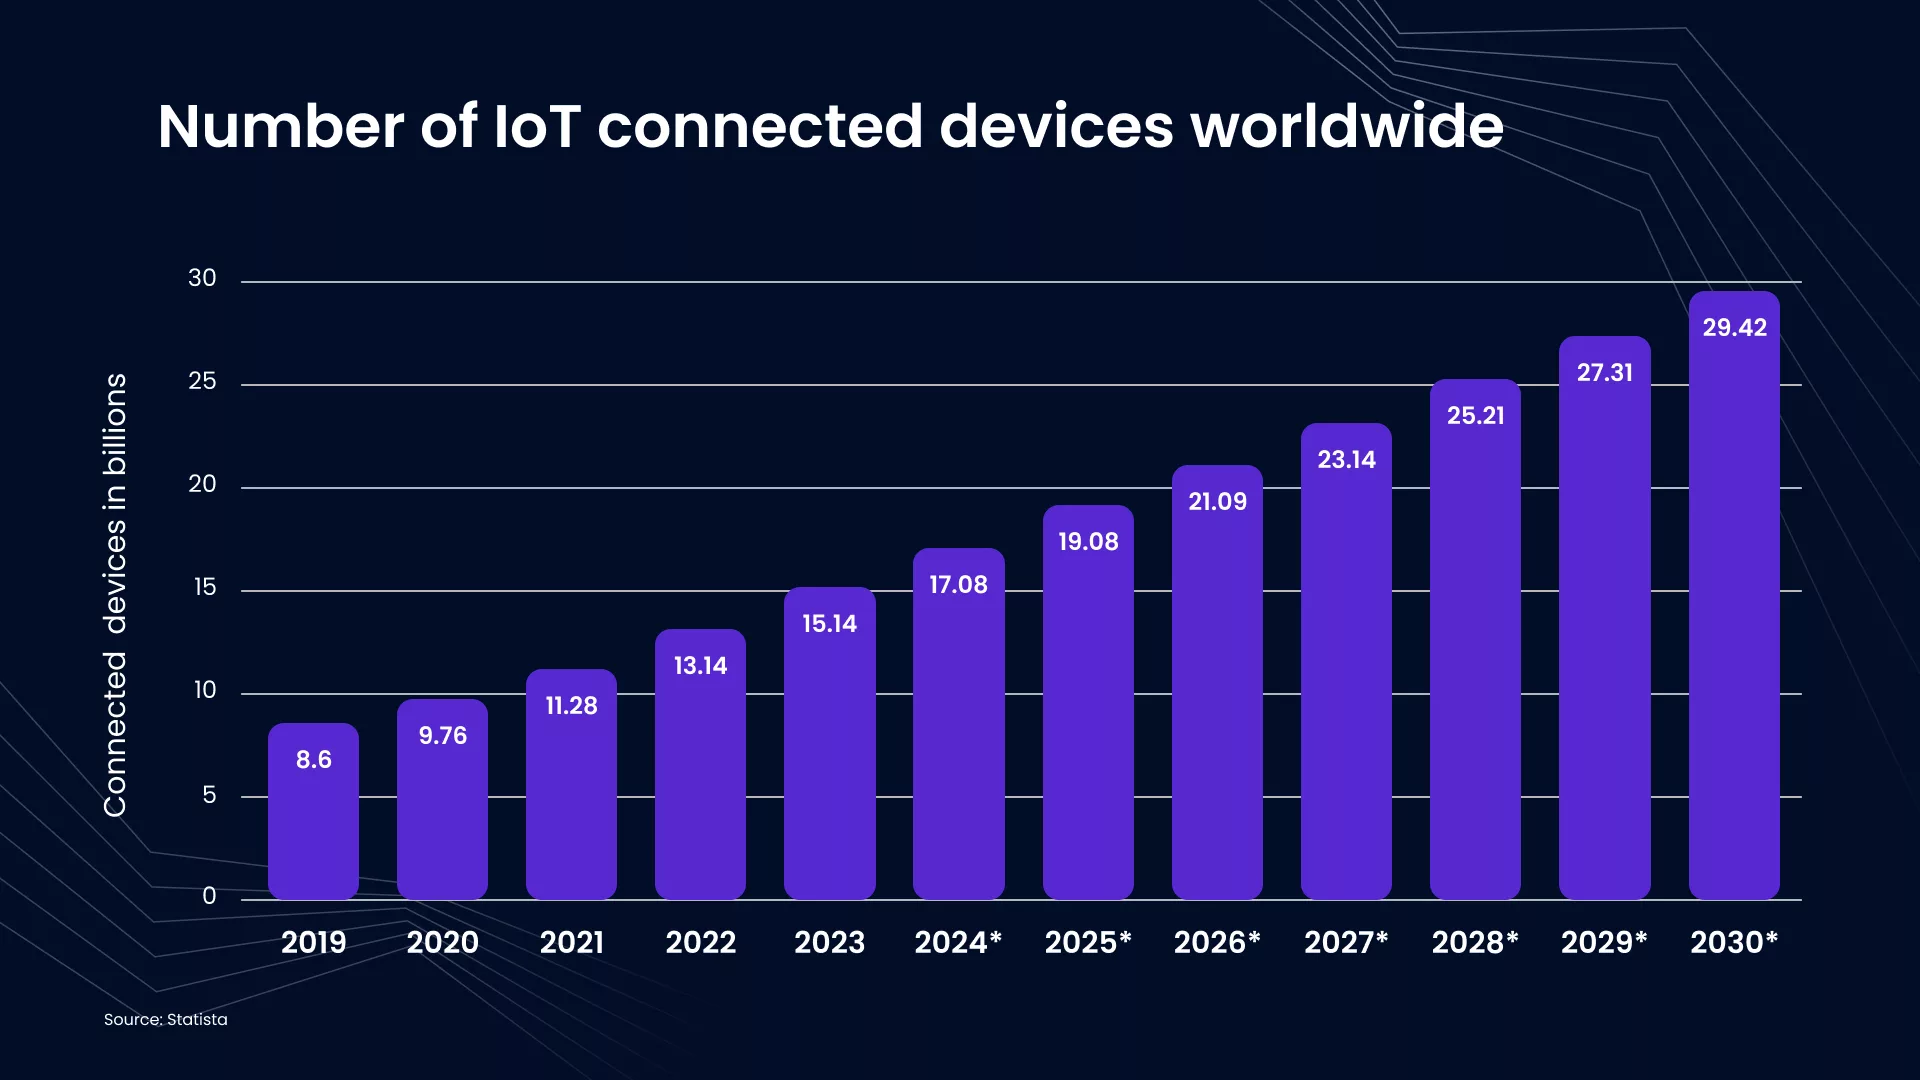 IoT devices worldwide